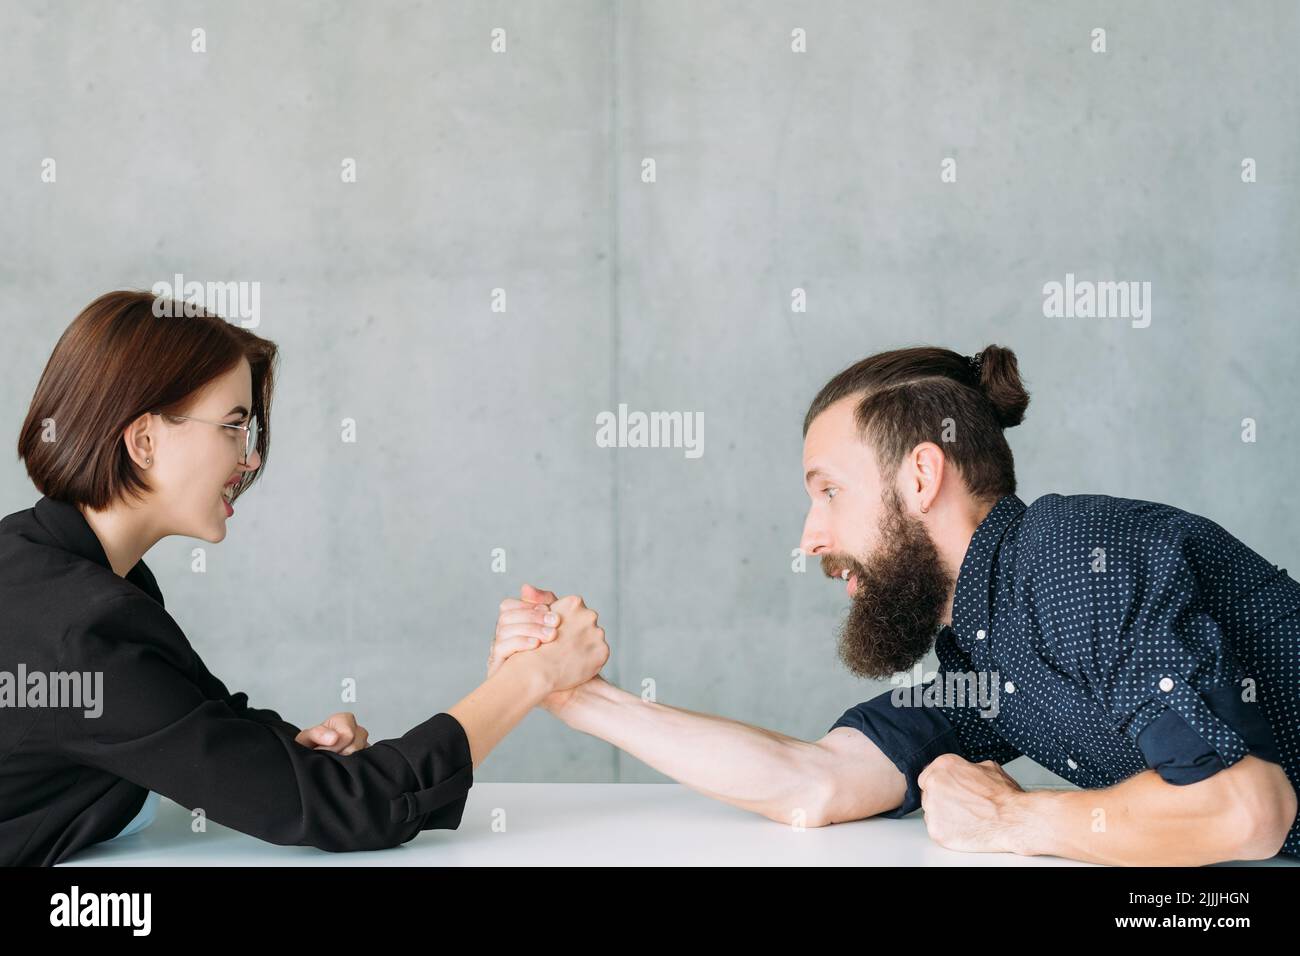 business competition struggle powerful opponent Stock Photo